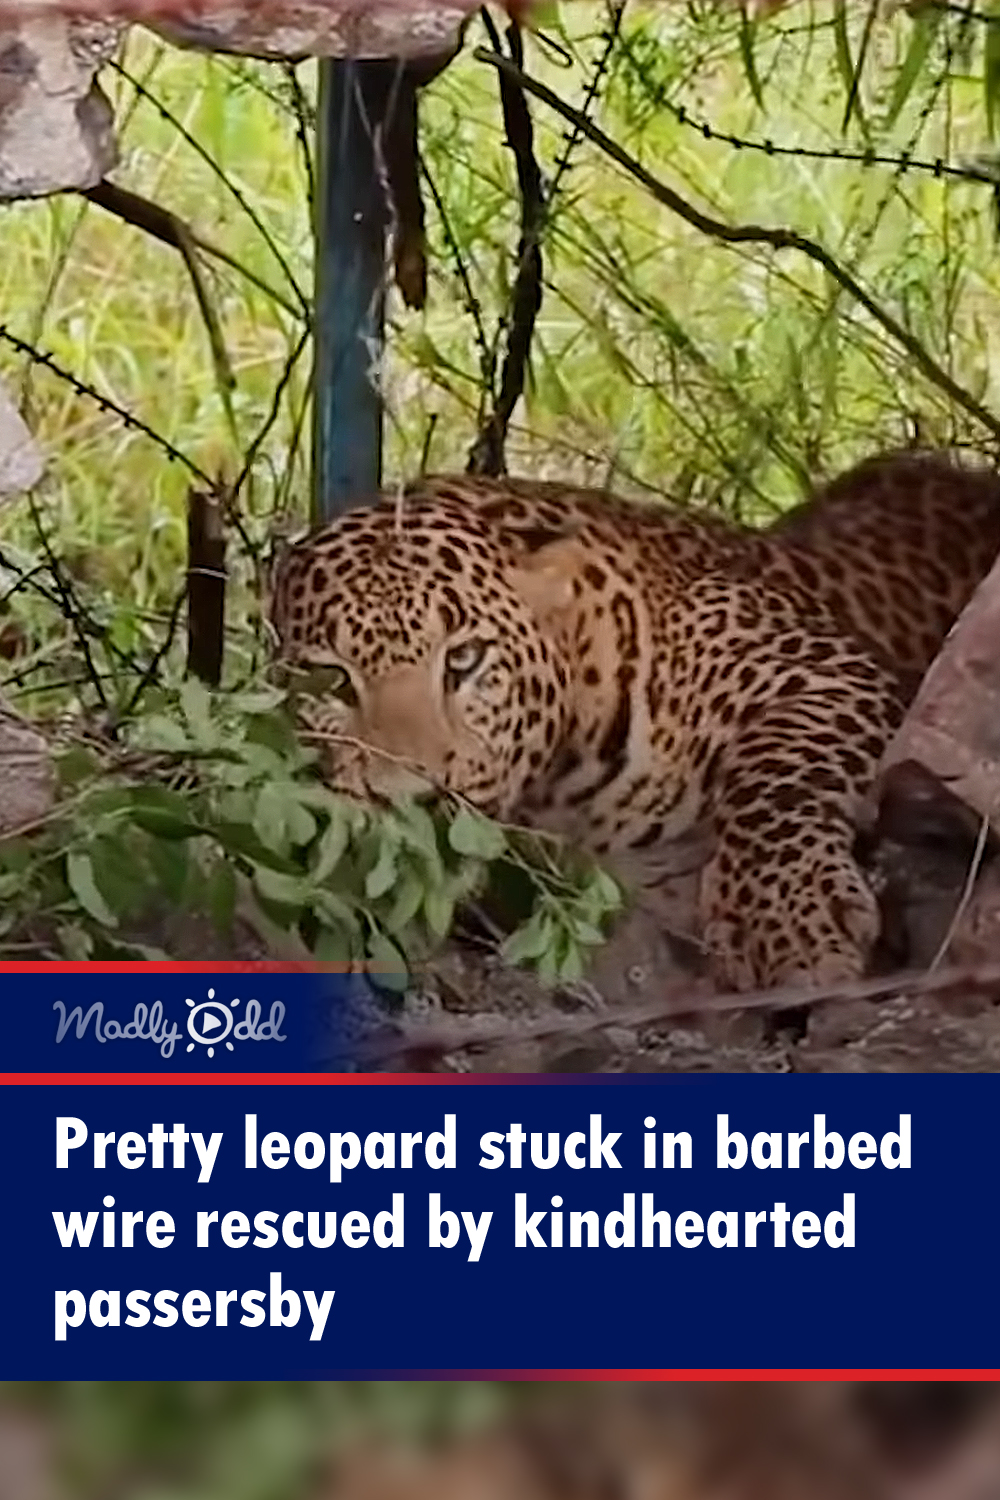 Leopard stuck in barbed wire rescued by kindhearted passersby